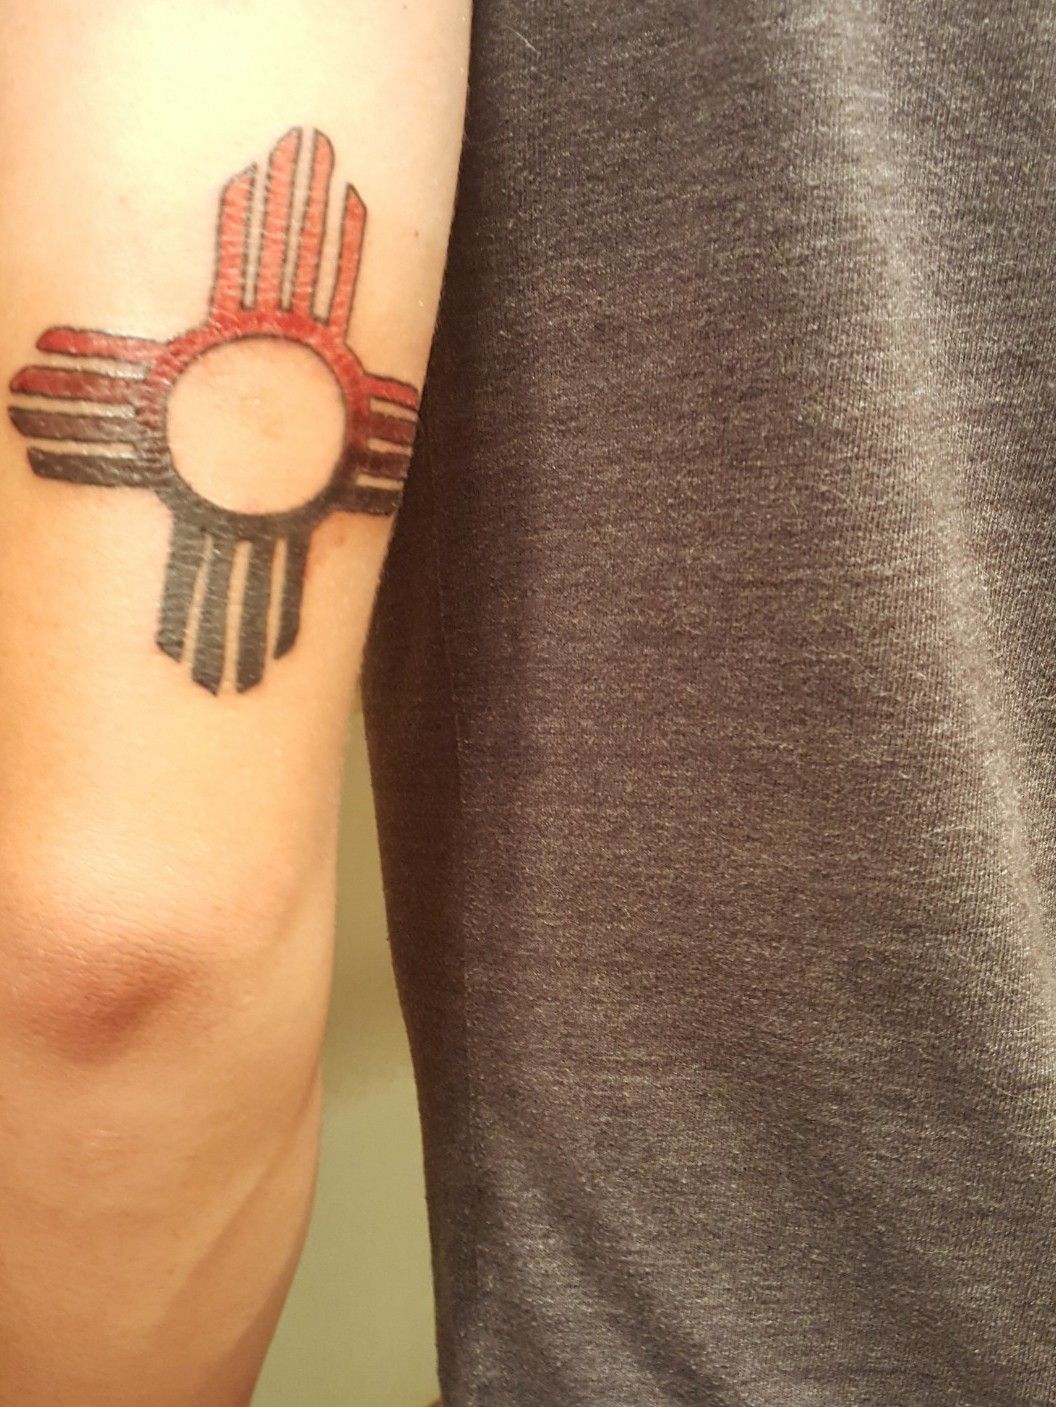 JJ Ohlinger Tattoos and Art  New Mexico tattoo inspired by the artwork of  Georgia OKeeffe This was pretty special when I was a kid and started  taking formal art classes I